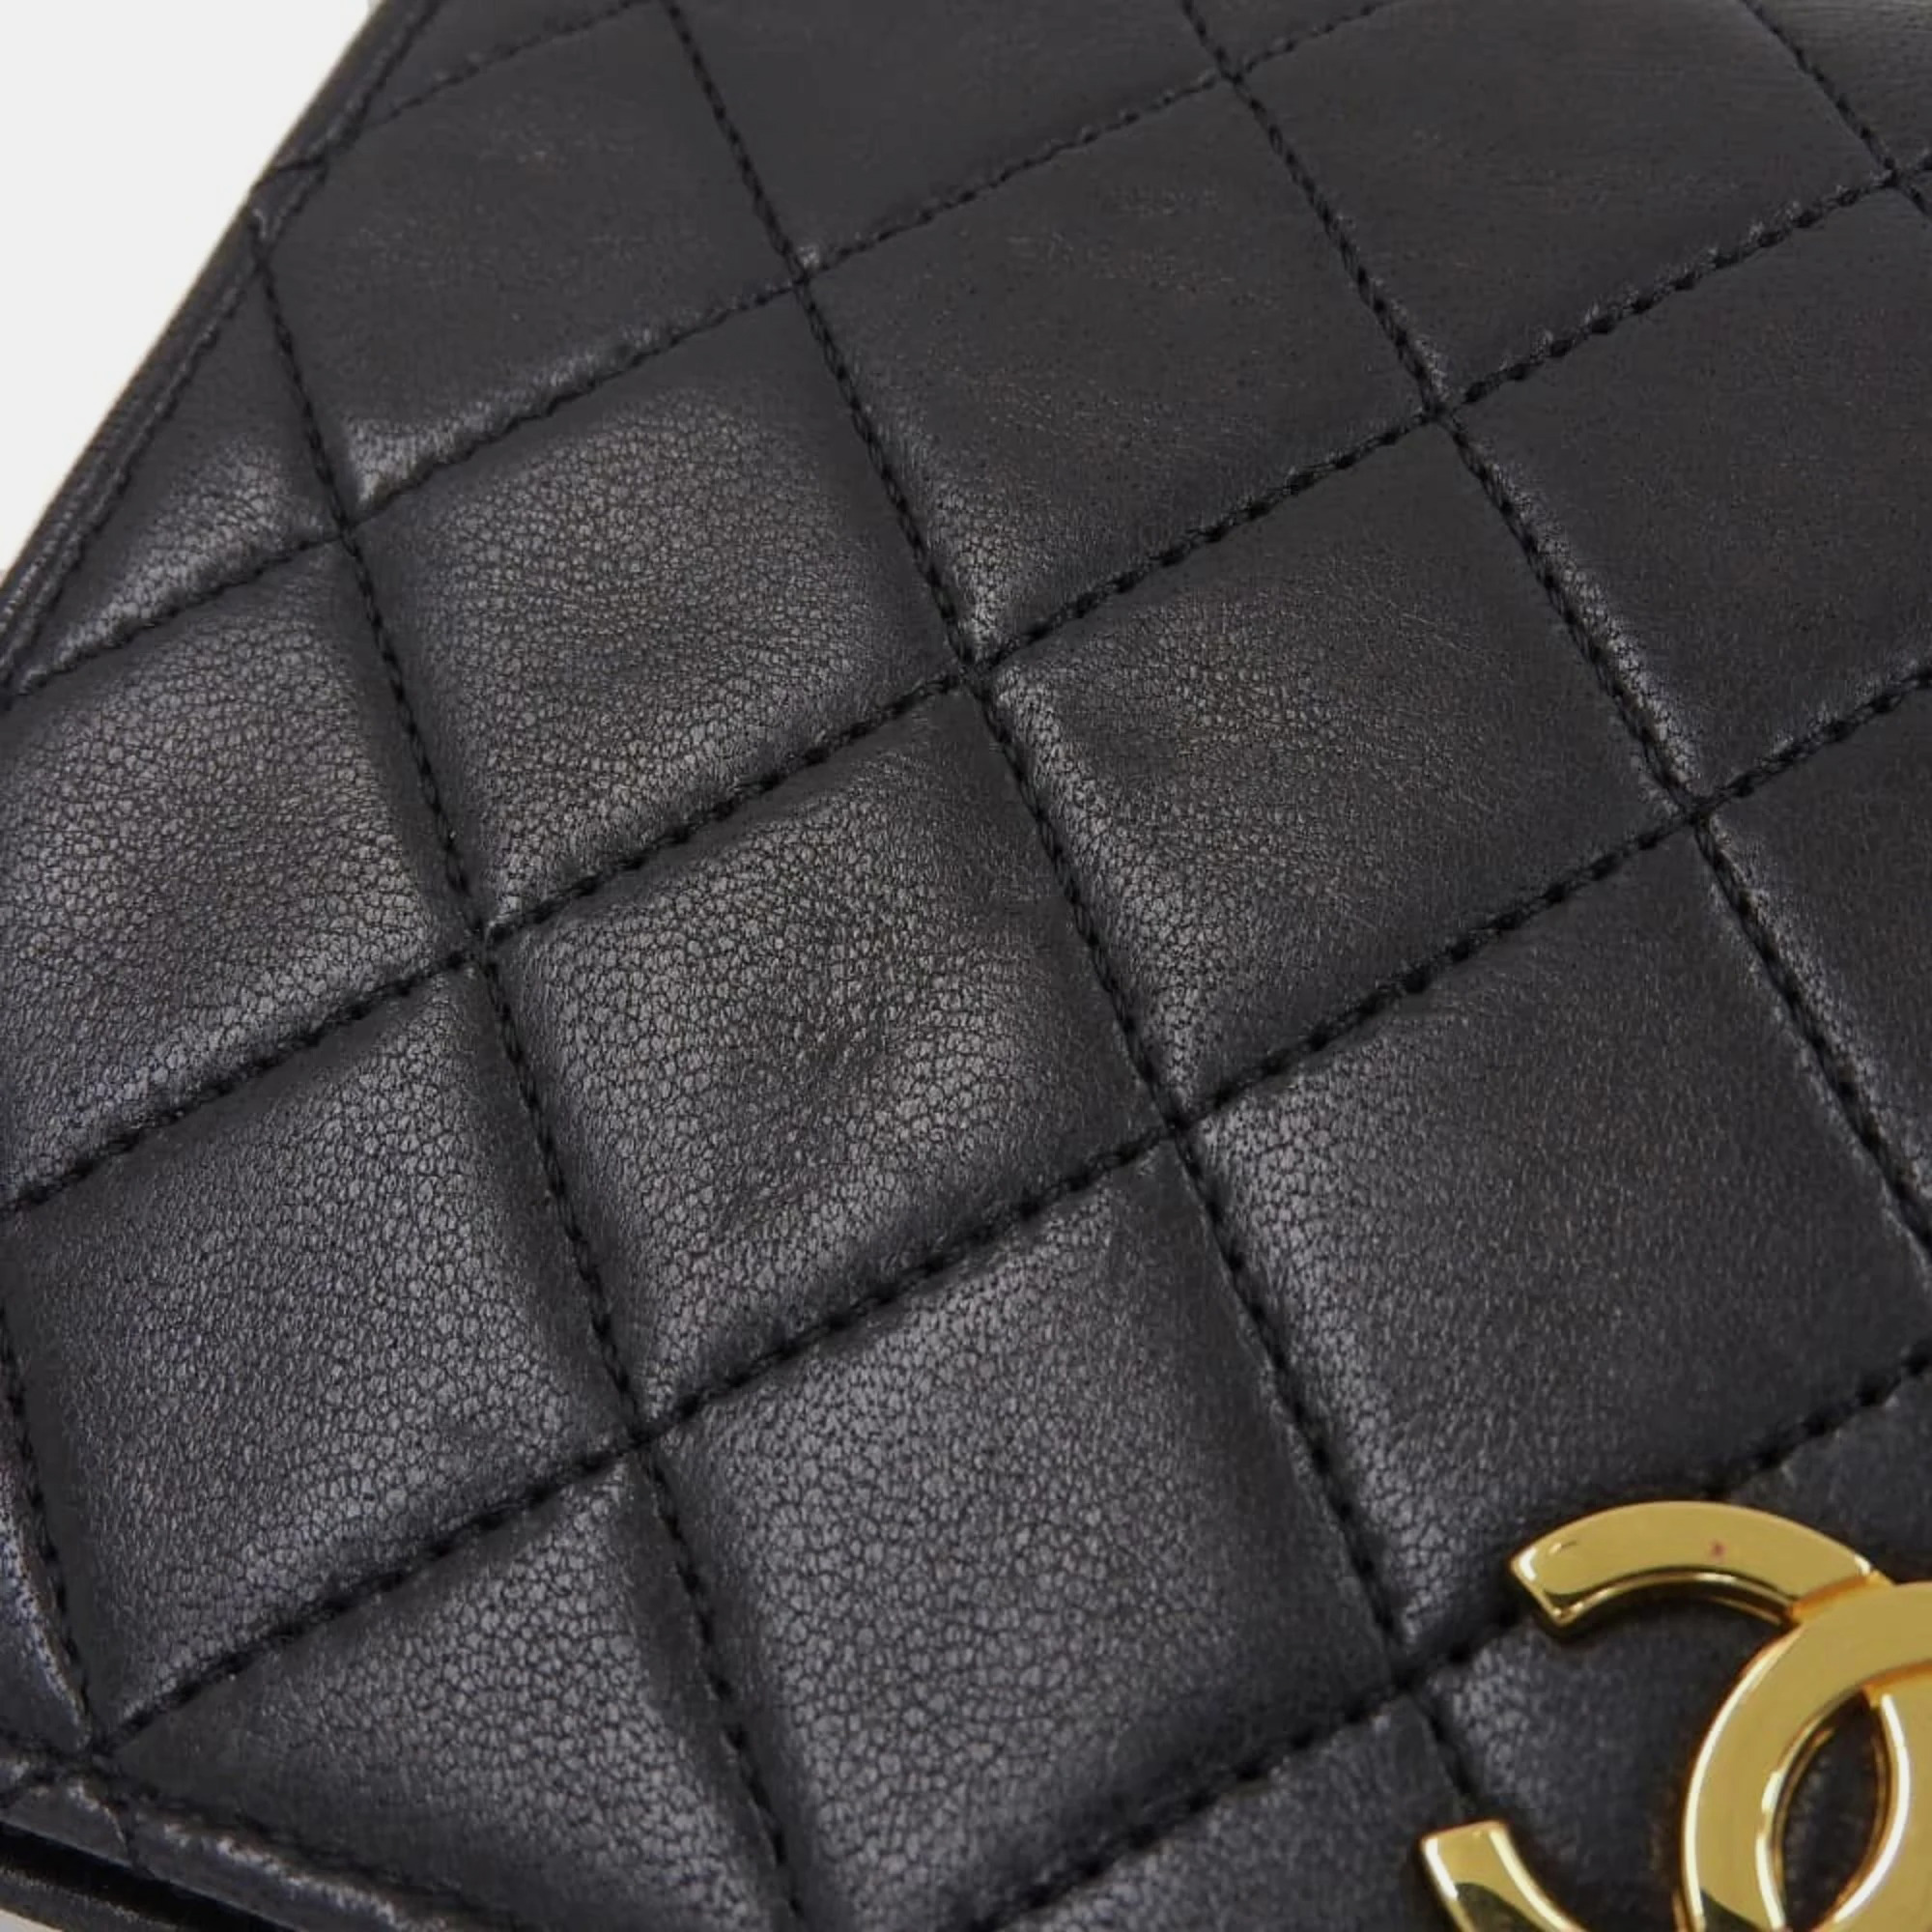 Chanel Black Leather Vintage Quilted Wallet On Chain